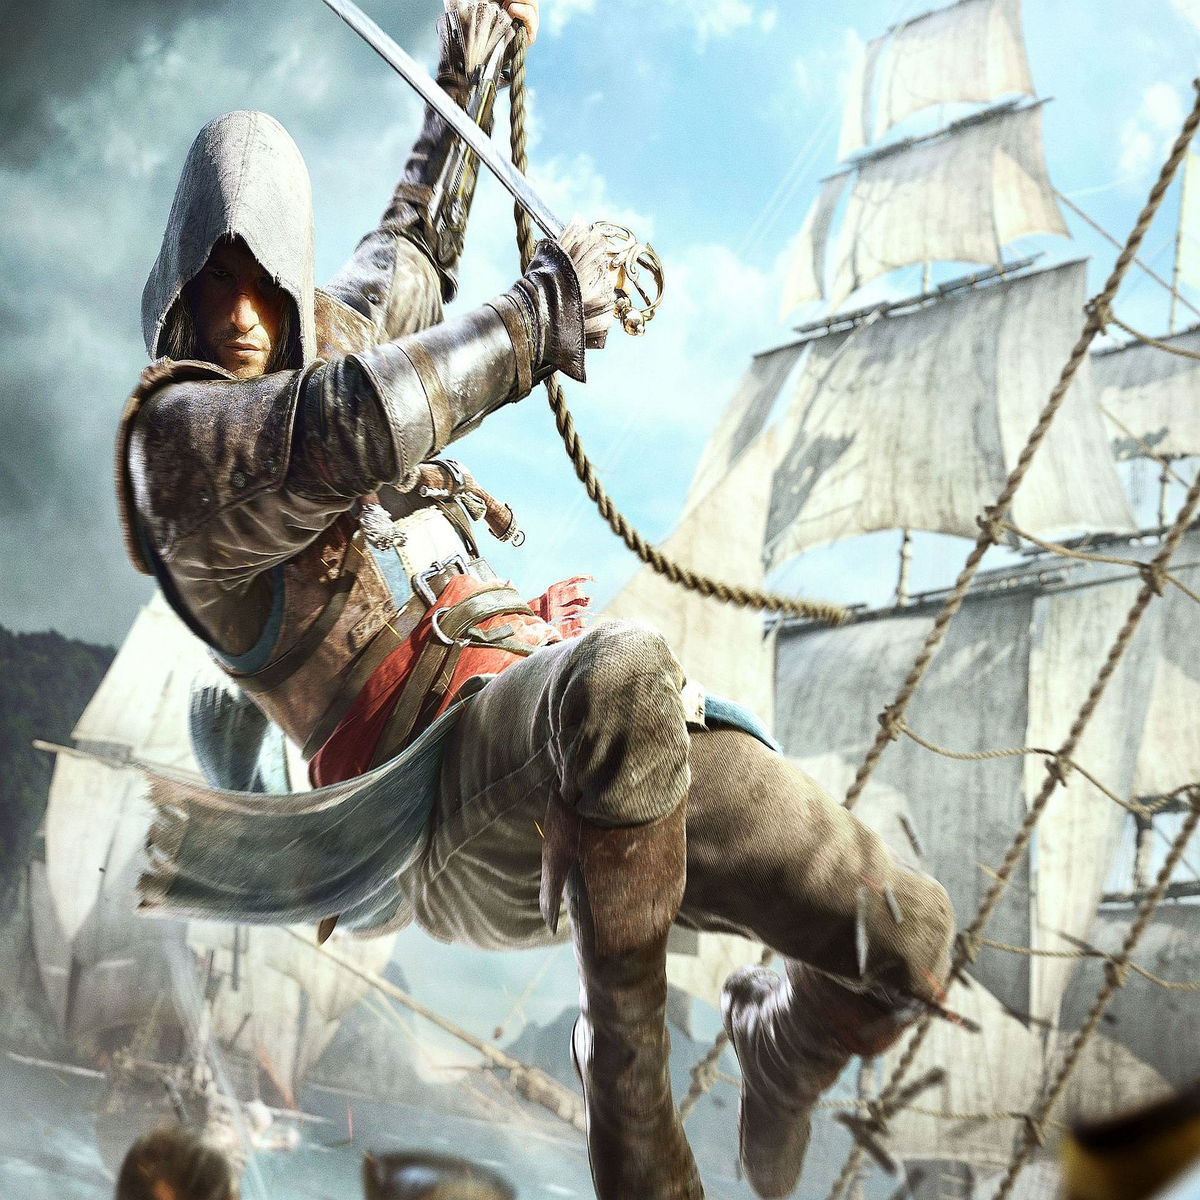 Play five Assassin's Creed games for free this weekend